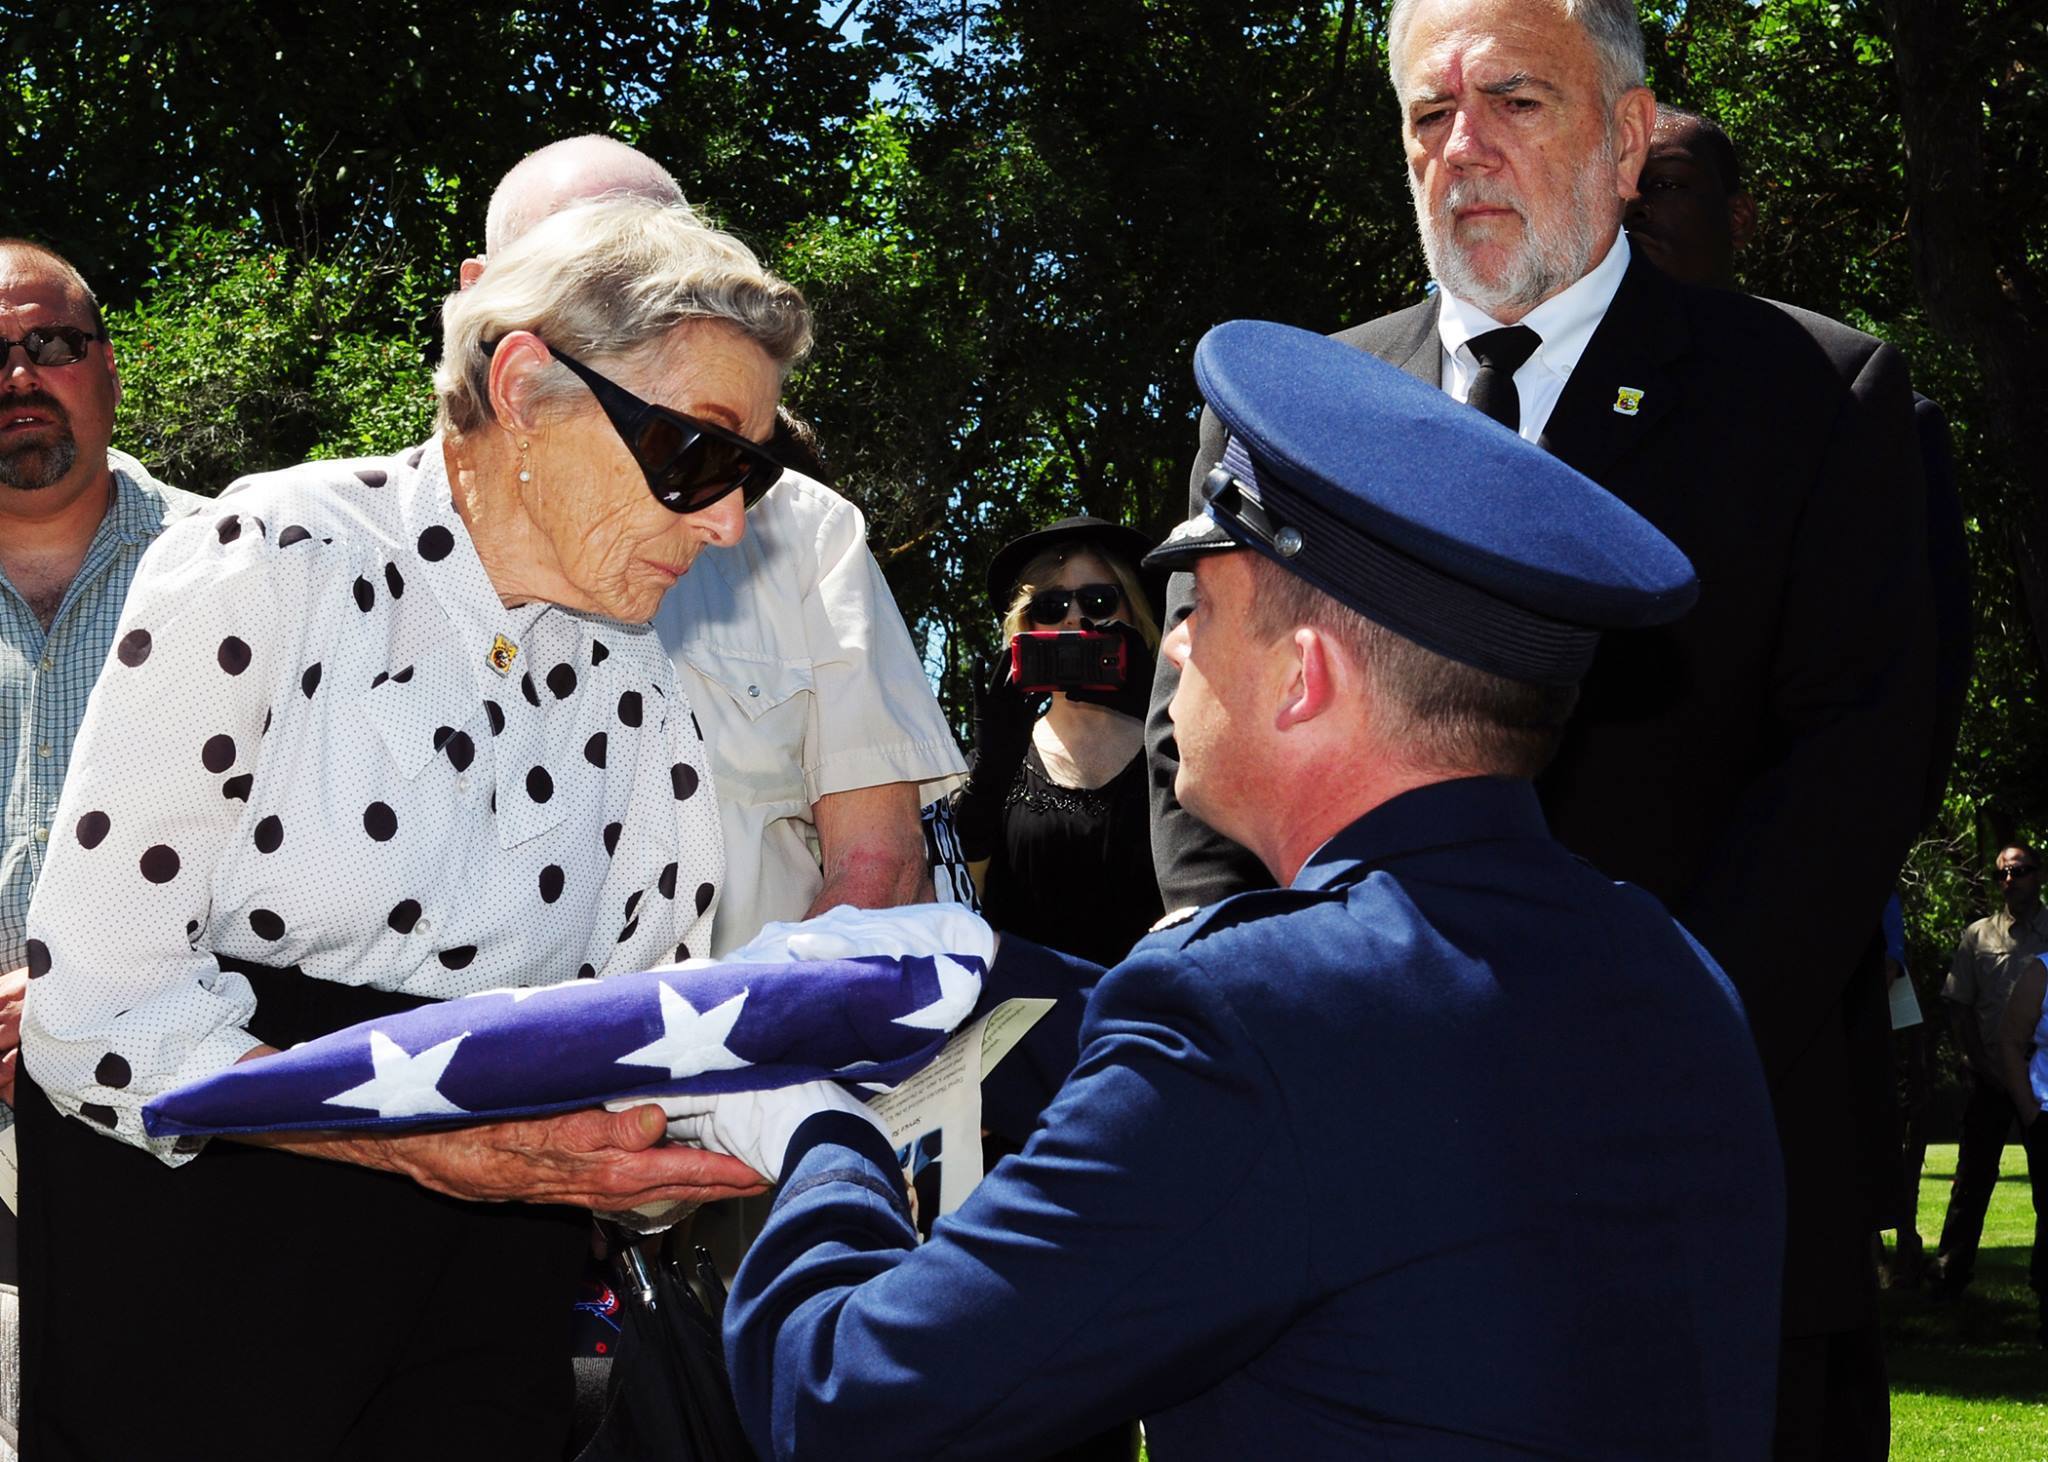 Lt. Col. Michael Epper, 341st Force Support Squadron commander, presents the flag to Dawn Thatcher, wife of Staff Sgt. David J. Thatcher, during a funeral service June 27 in Missoula, Mont. At 20 years old, Sgt. Thatcher was an engineer gunner in Flight Crew 7 of the Doolittle Tokyo Raids. His crew crash-landed into sea off the coast of China on April 18, 1942. Thatcher saved four members of the crew by pulling them to safety on the surrounding beach and applying life-saving medical treatment, even though he was injured himself. (U.S. Air Force photo by 2nd Lt. Annabel Monroe) 